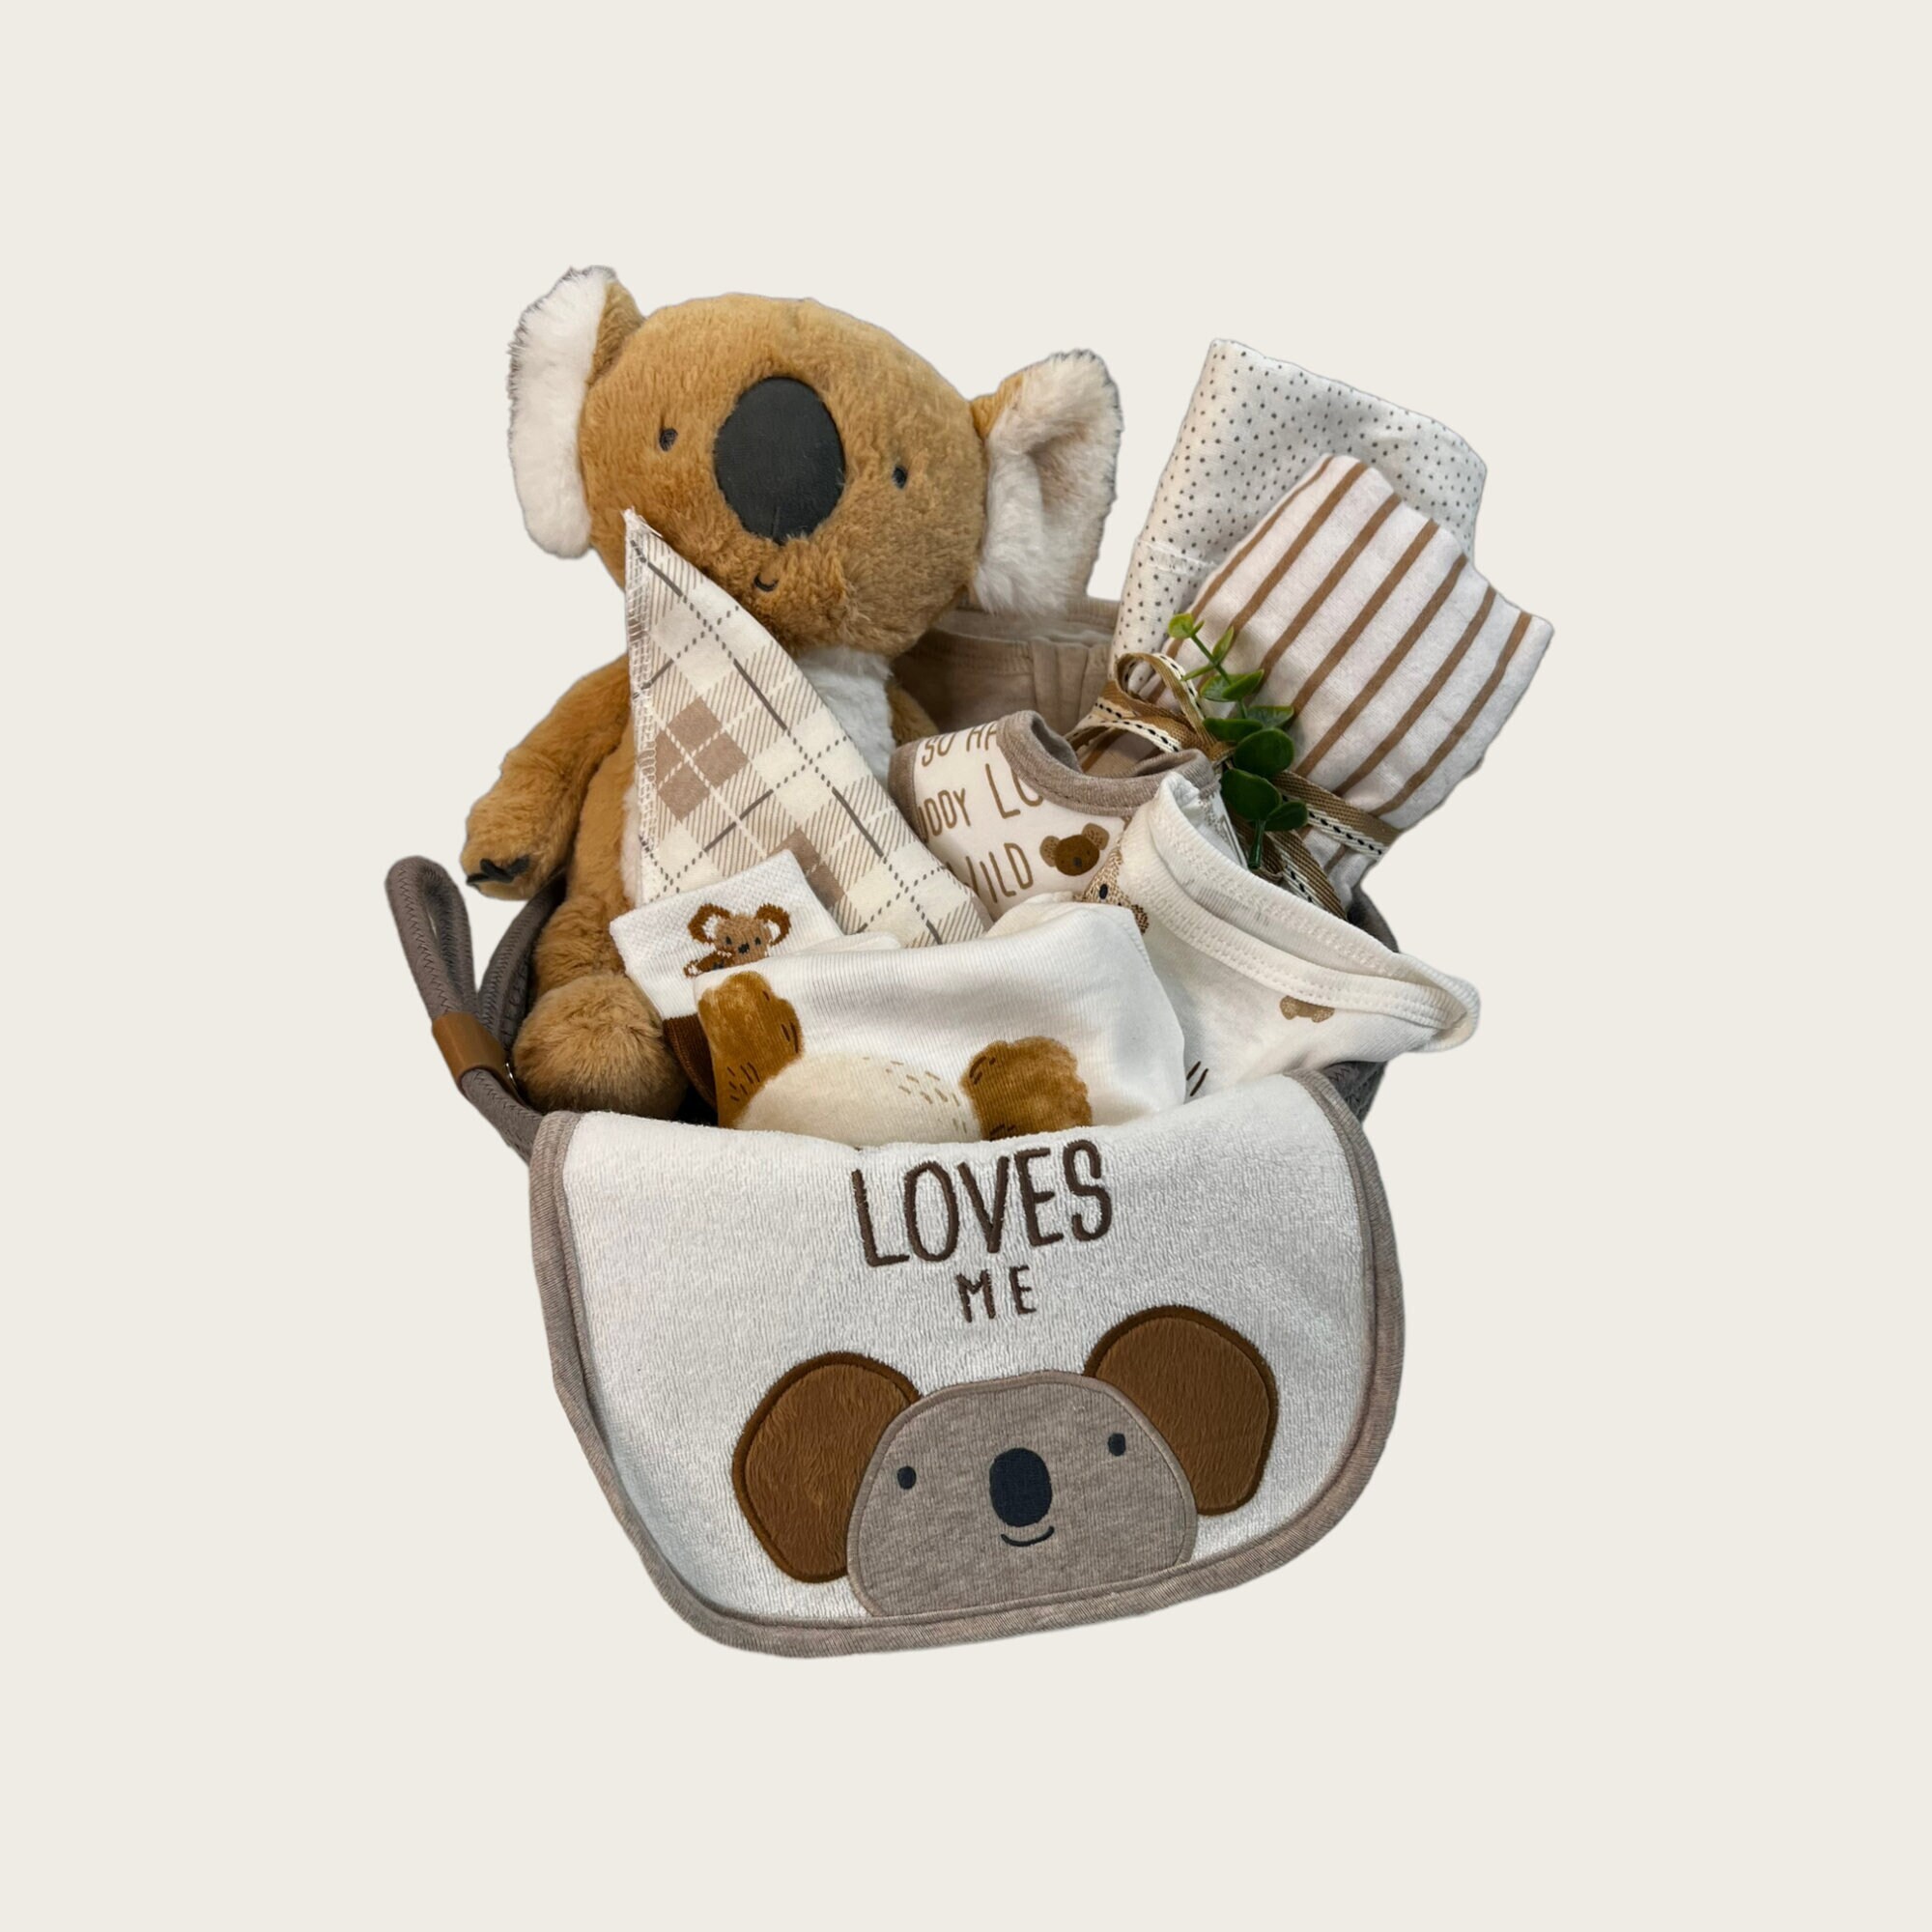 Baby Shower Gifts, New Born Baby Gifts for Girls Boys, Unique Baby Shower  Gifts Basket Includes Newborn Blanket,Security Beech Wood Koala